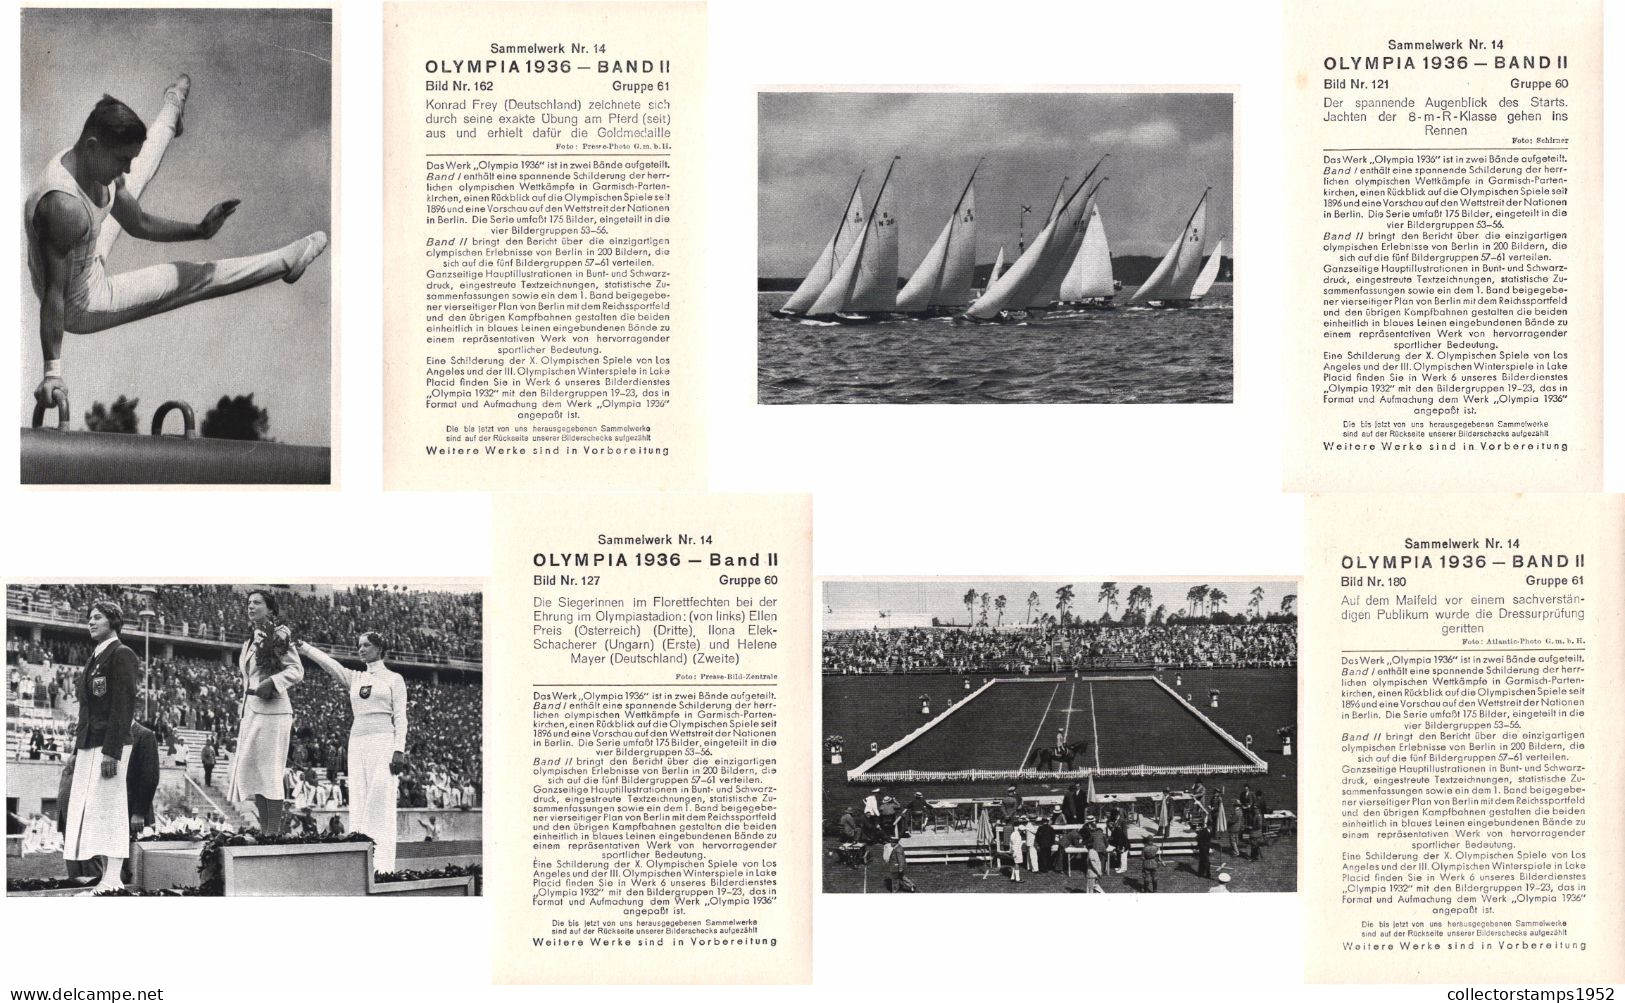 SPORTS, SET OF 71 PIECES, OLYMPIA 1936, BAND II, ED. VOL. 14., BERLIN, STADION, FLAG, BOAT, ARCHITECTURE, HORSE, GERMANY